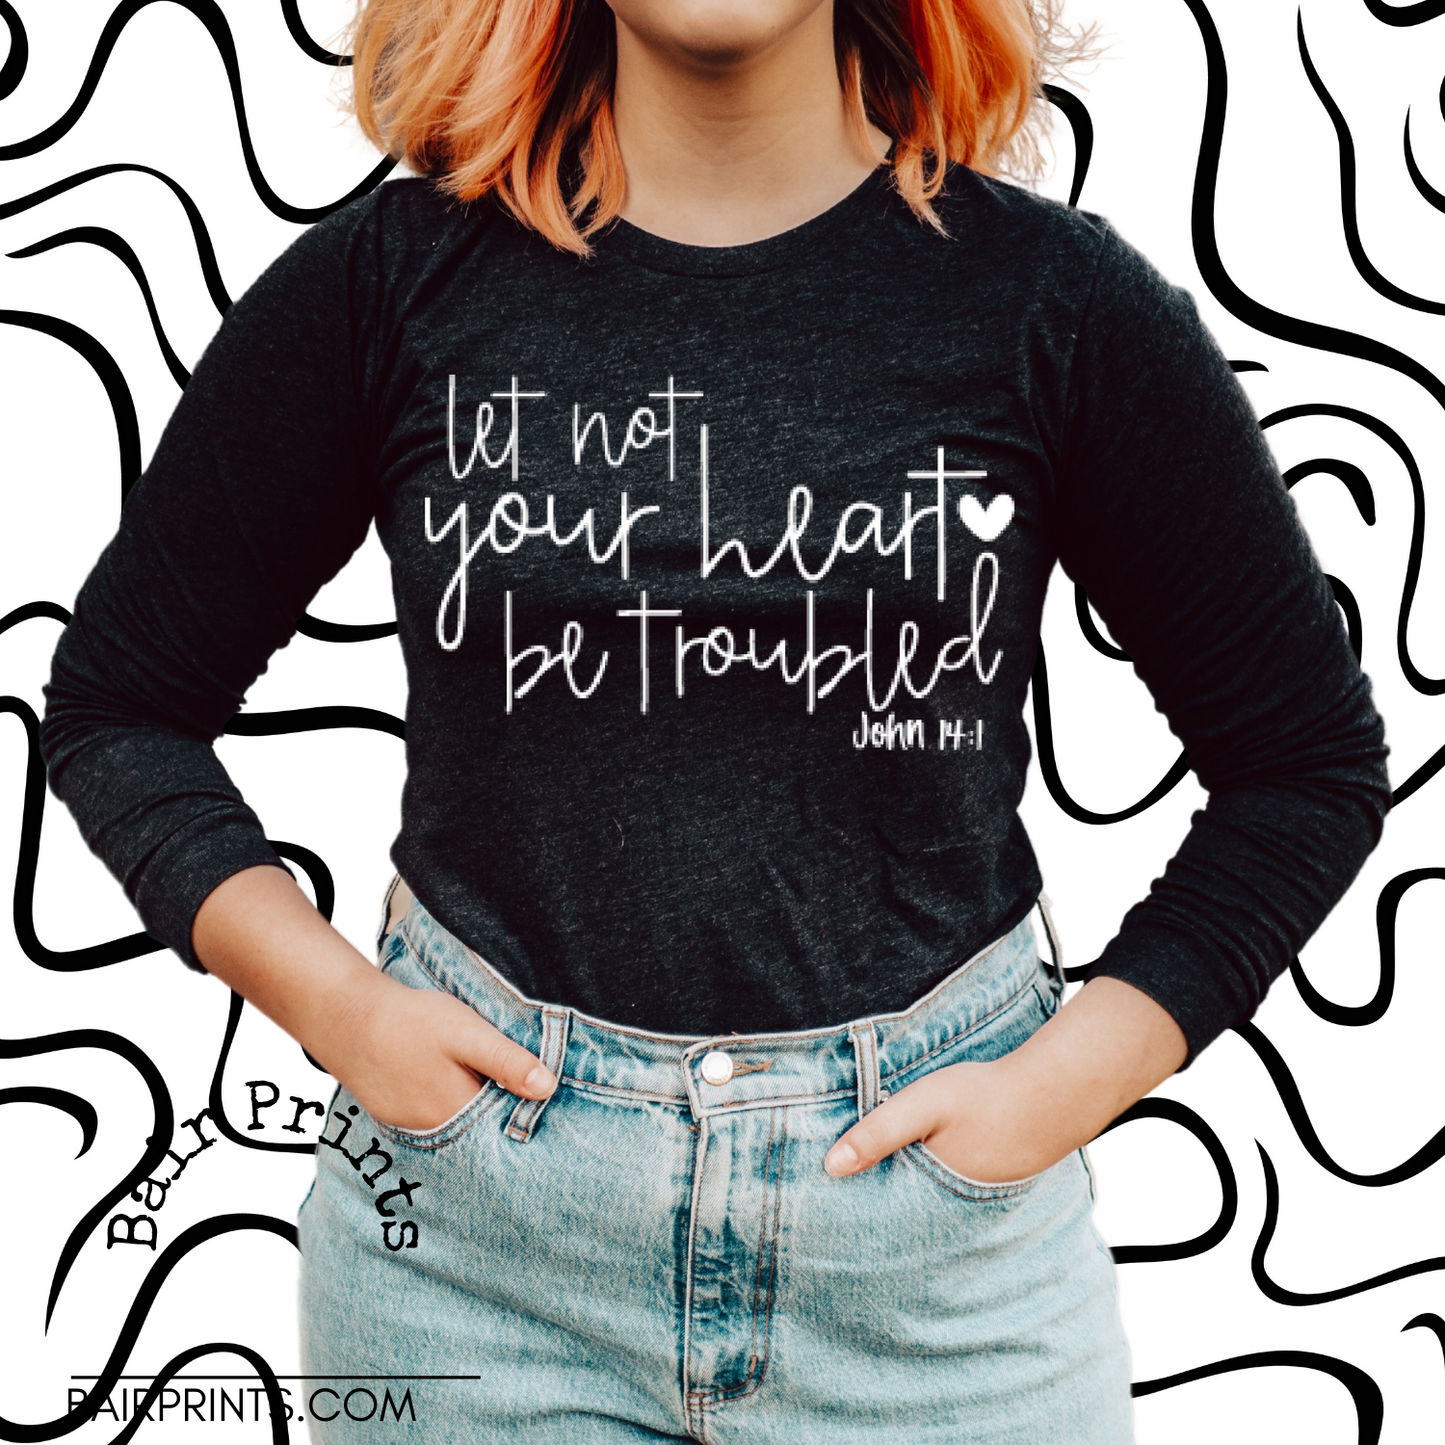 Let Your Heart Not Be Troubled John 14:1 Tee Shirt